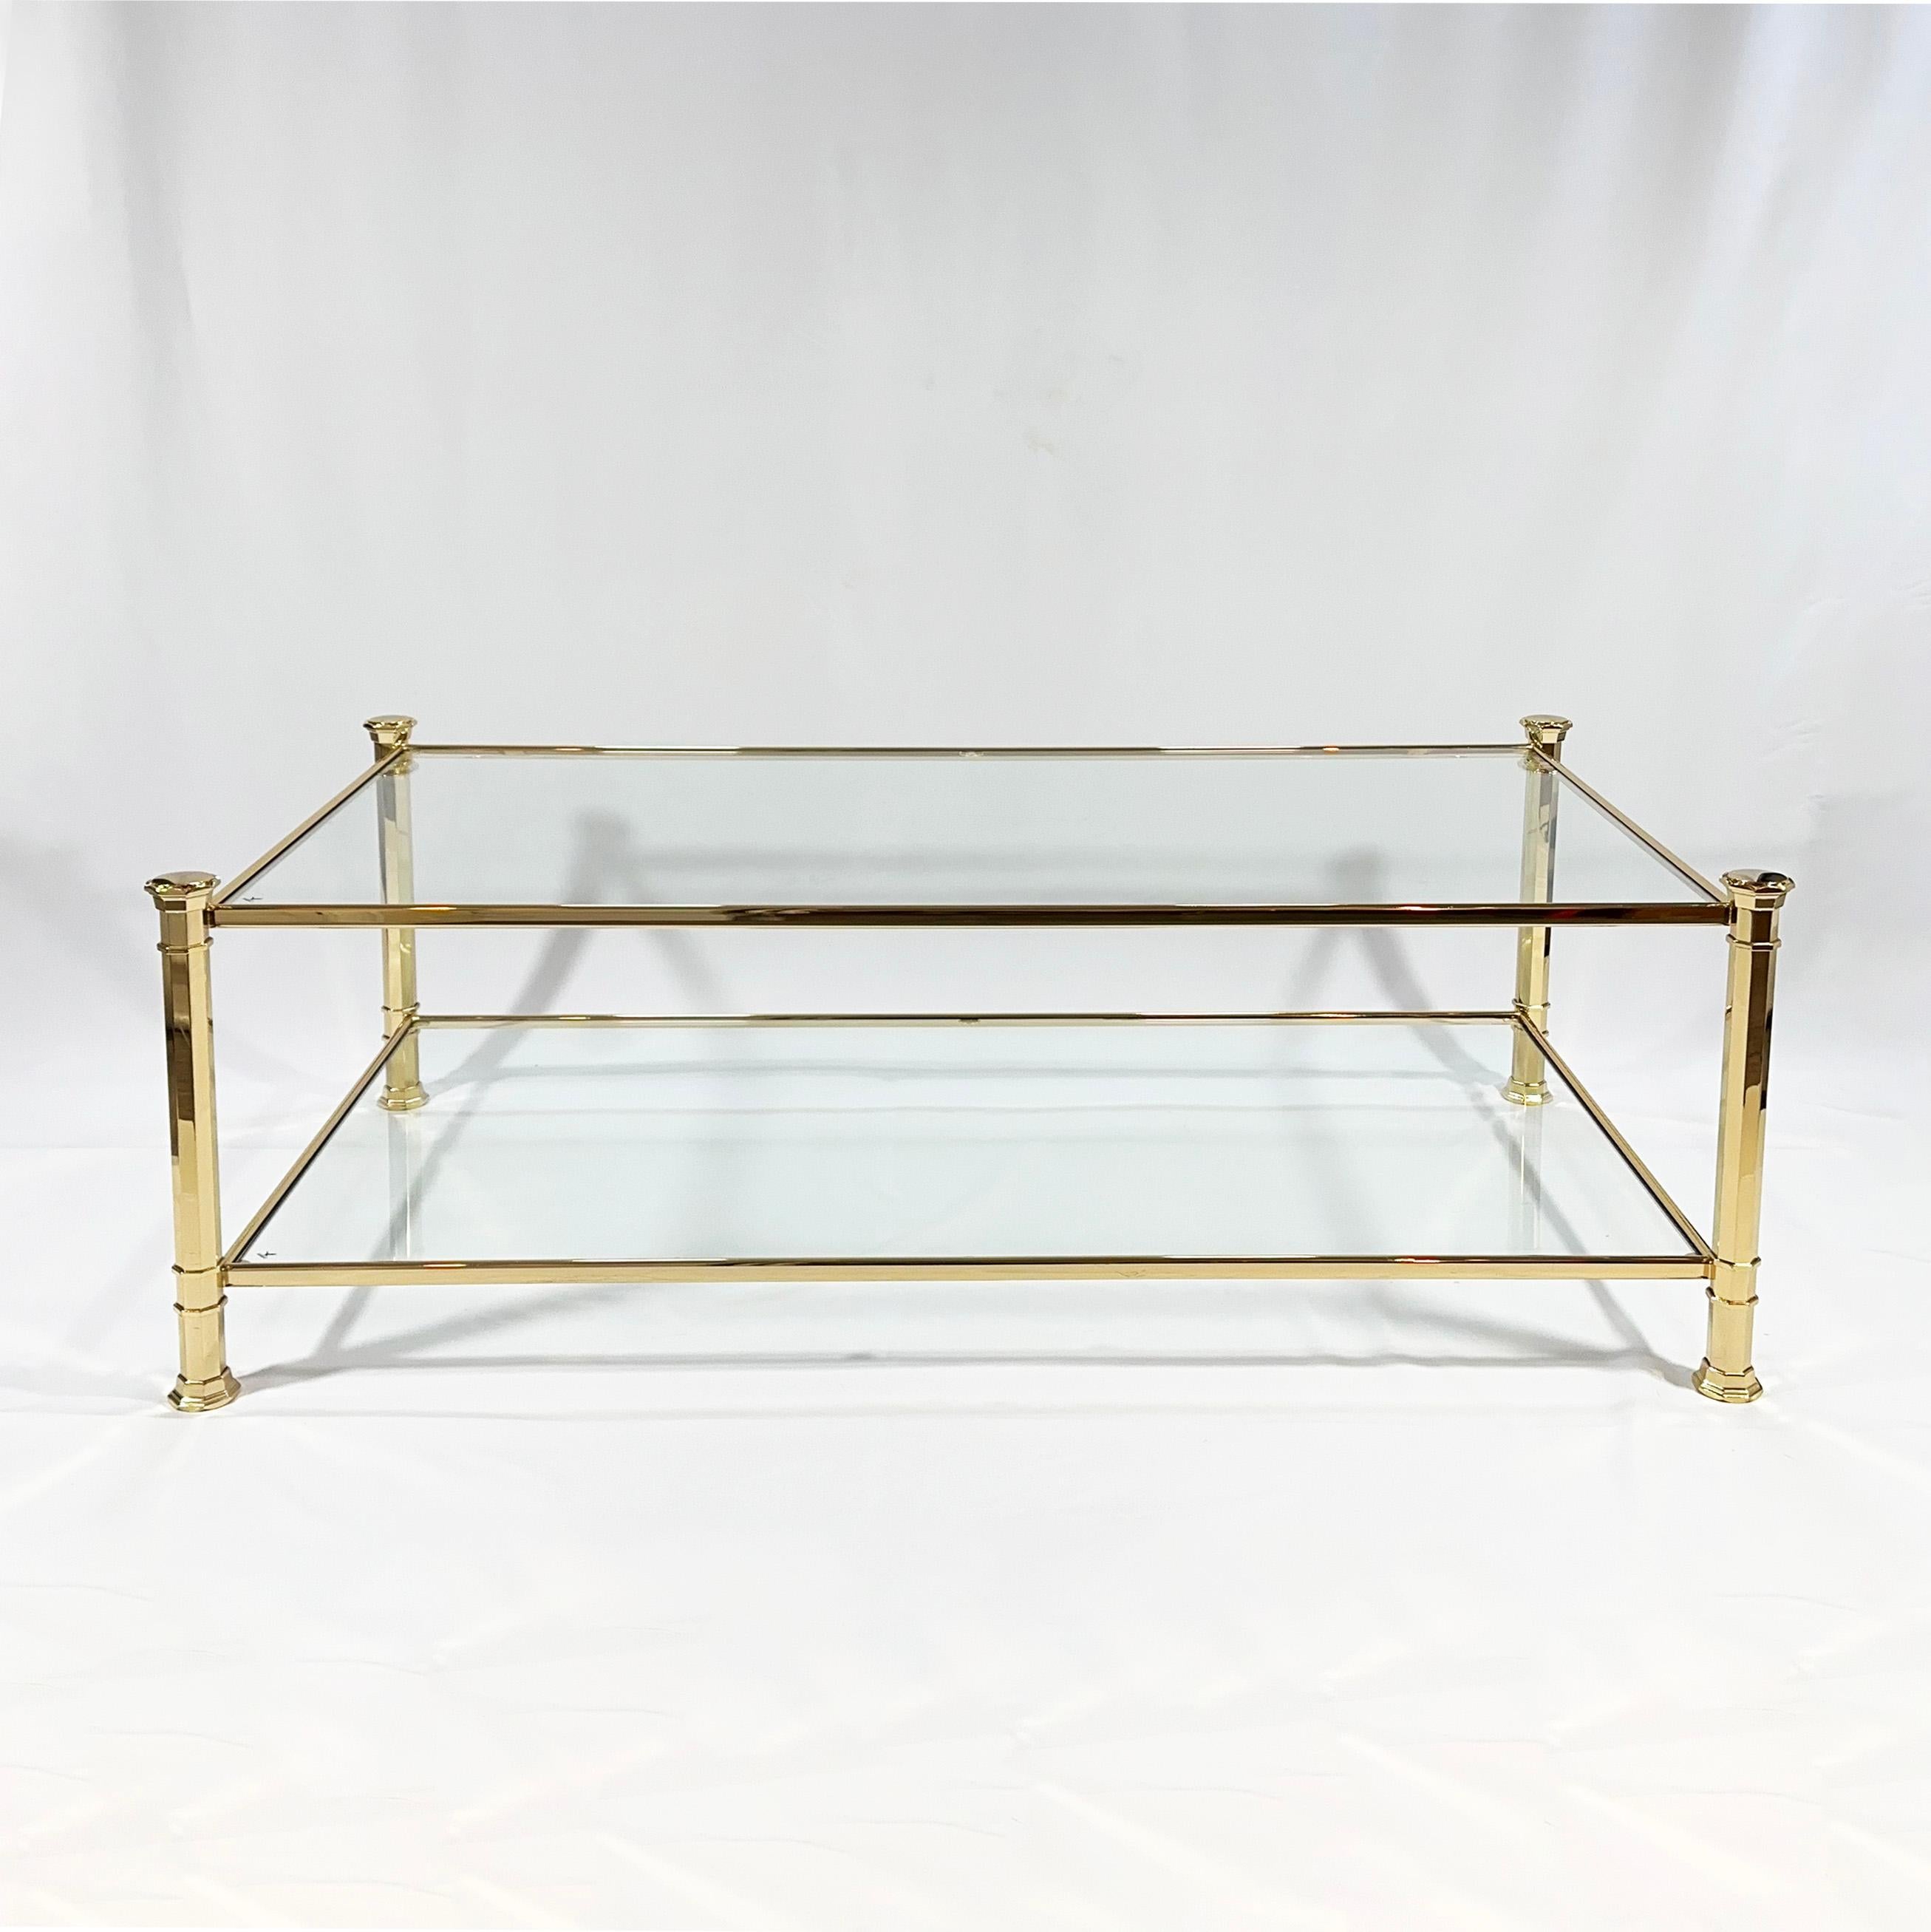 1970s French Brass Coffee Table with Glass Tiers, Neoclassical Influences 3